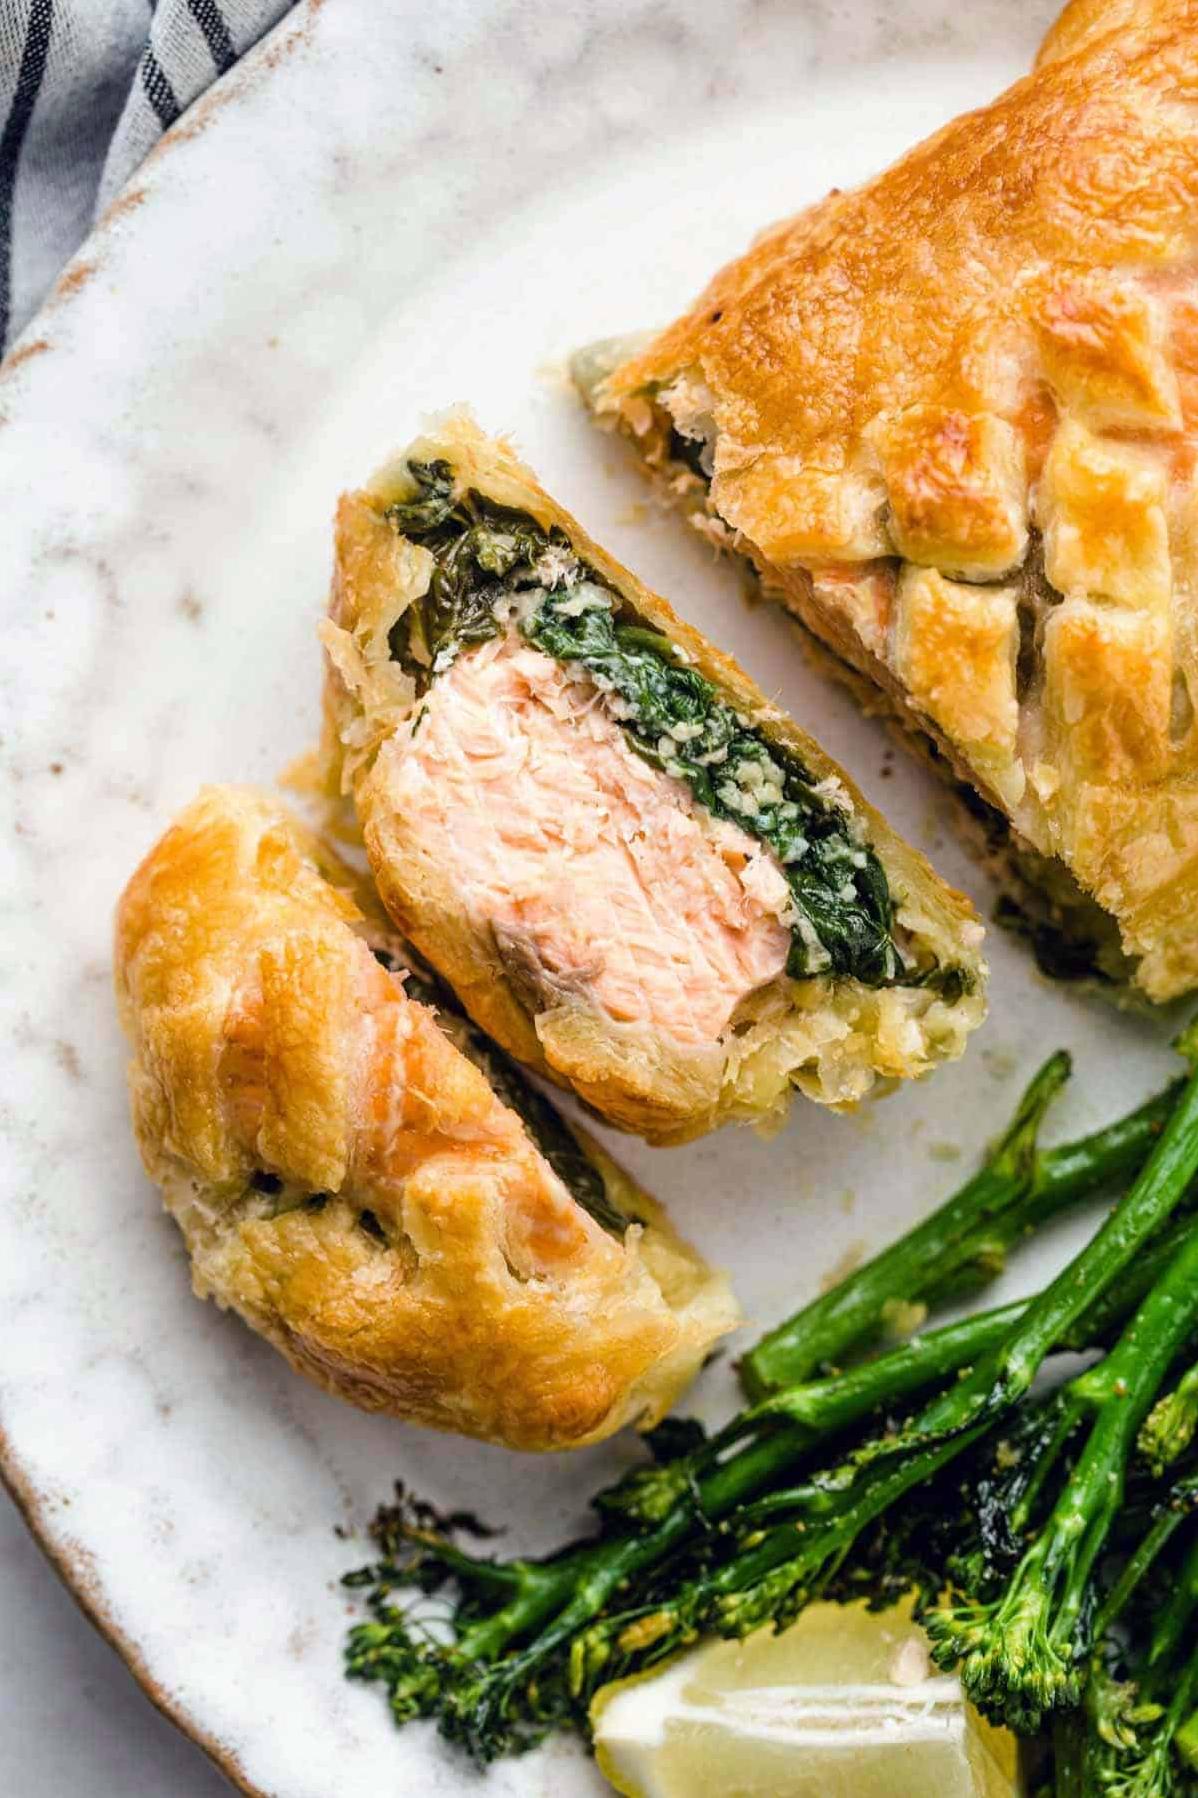  Flaky, buttery pastry crust enveloping tender salmon